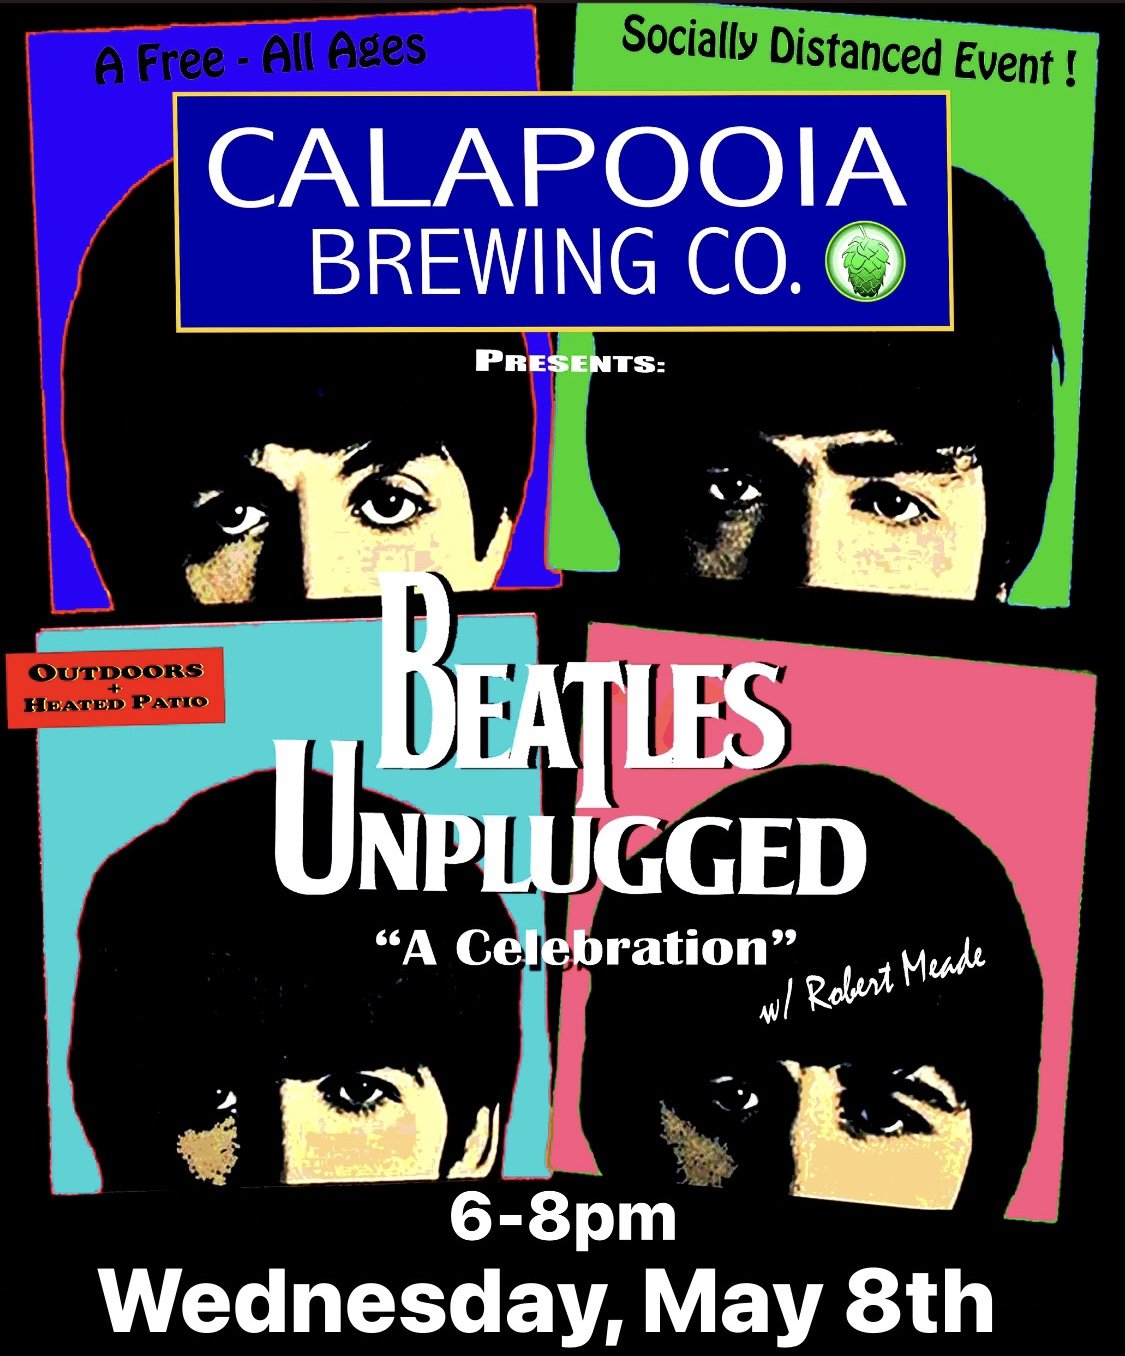 Join us tonight from 6-8pm in the Atrium. Groove to your favorite Beatles tunes!